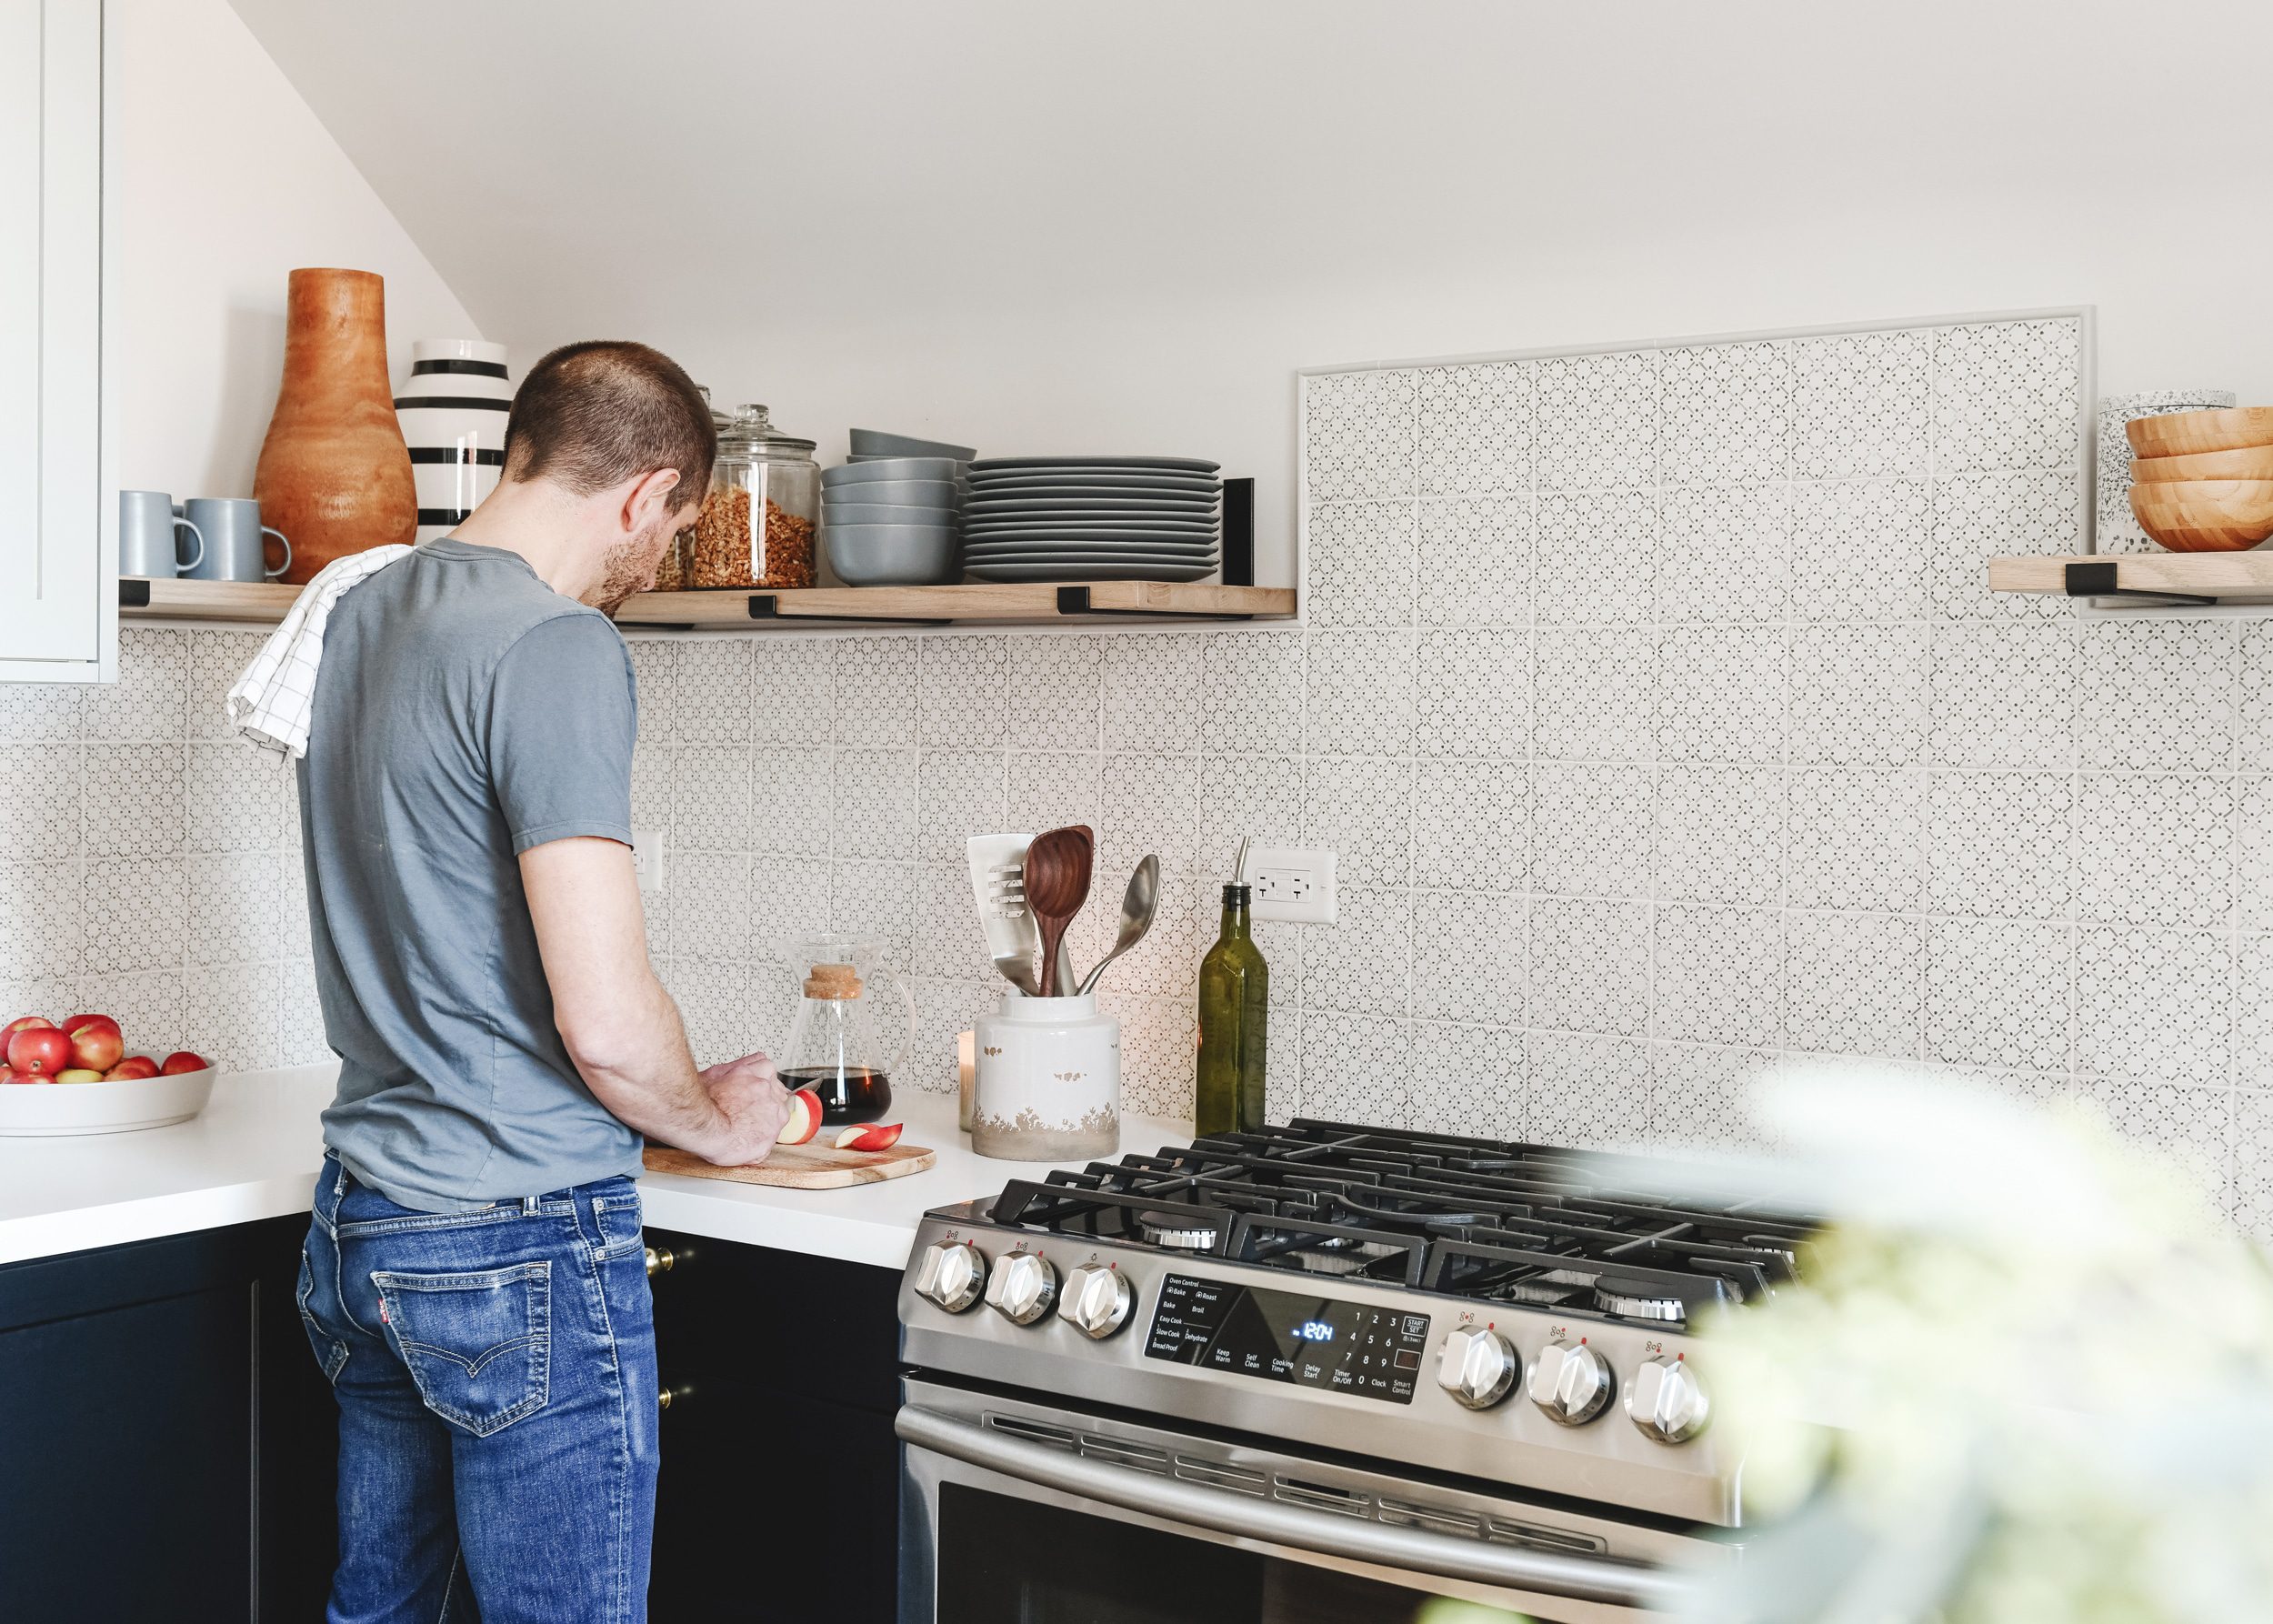 Scott cuts apples on the Formica countertop in our Unit 2 kitchen | via Yellow Brick Home